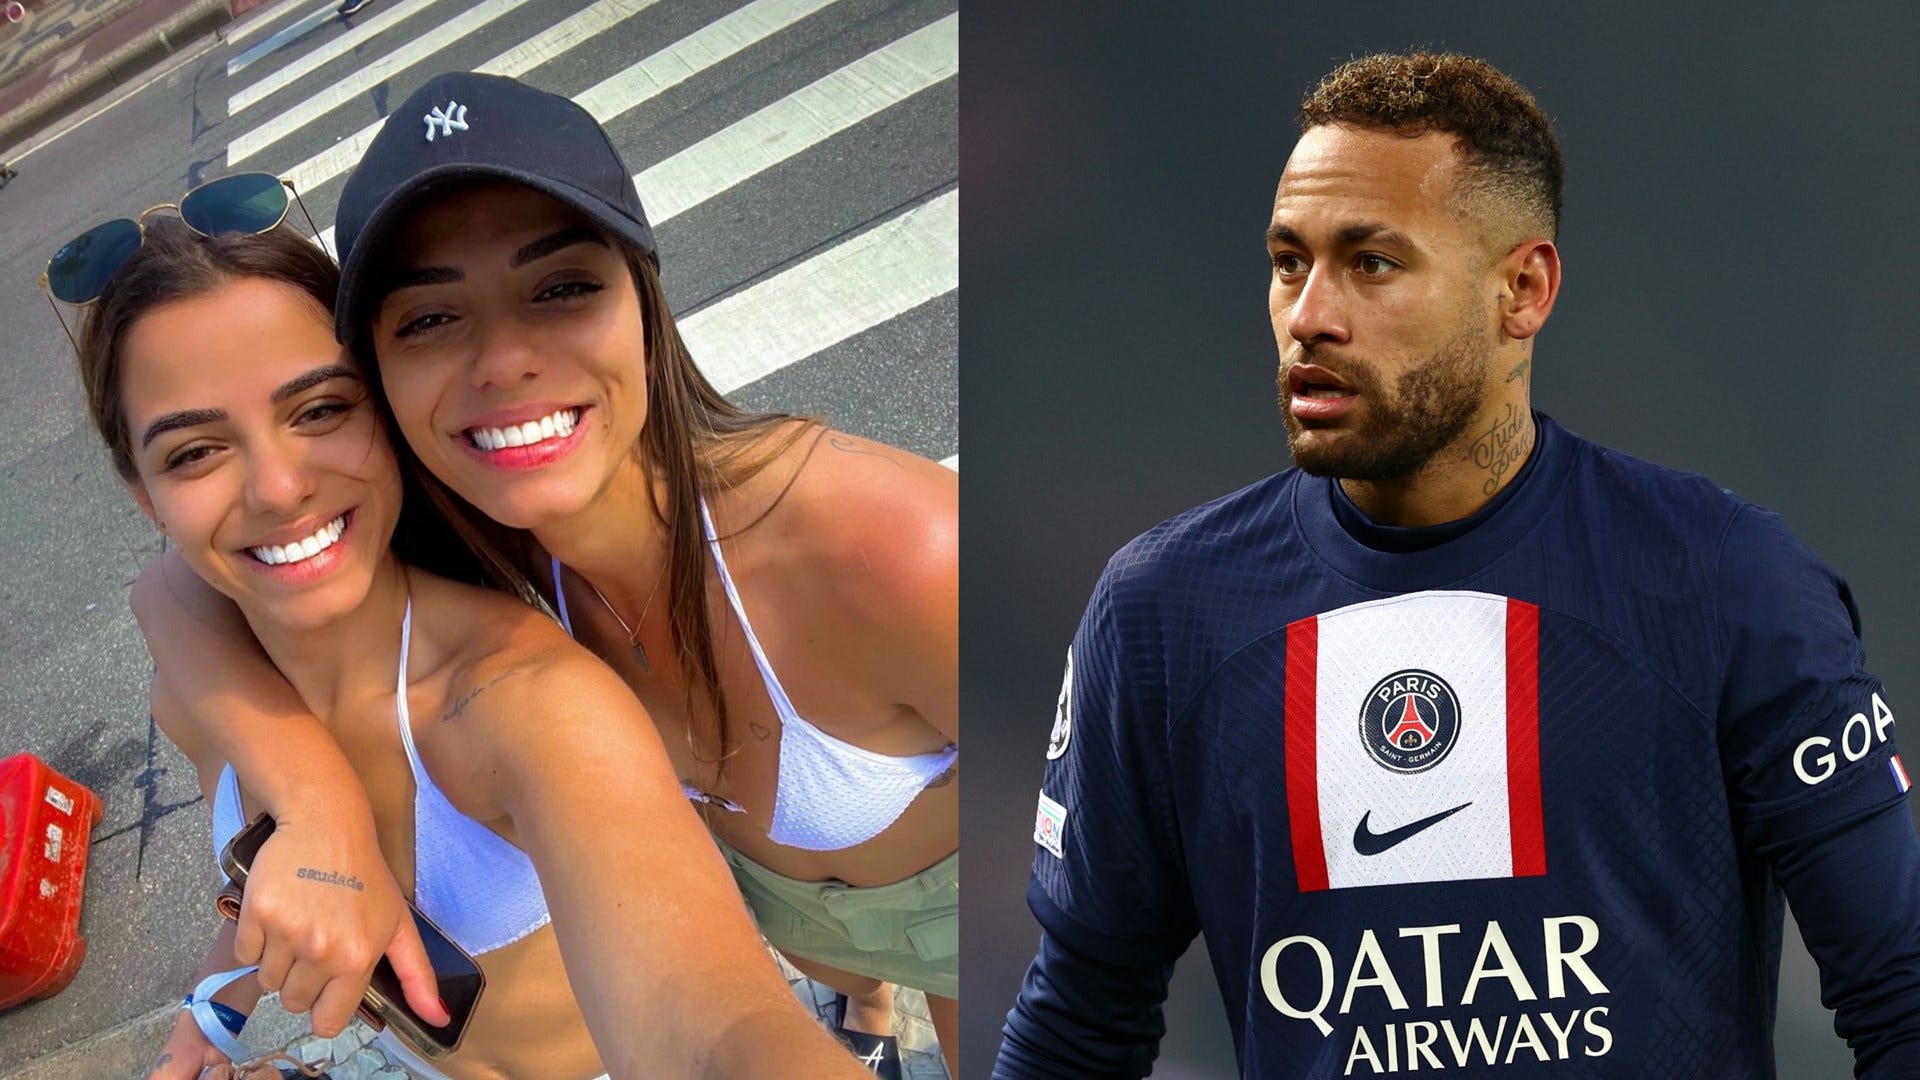 Neymar asked for sex with both of image